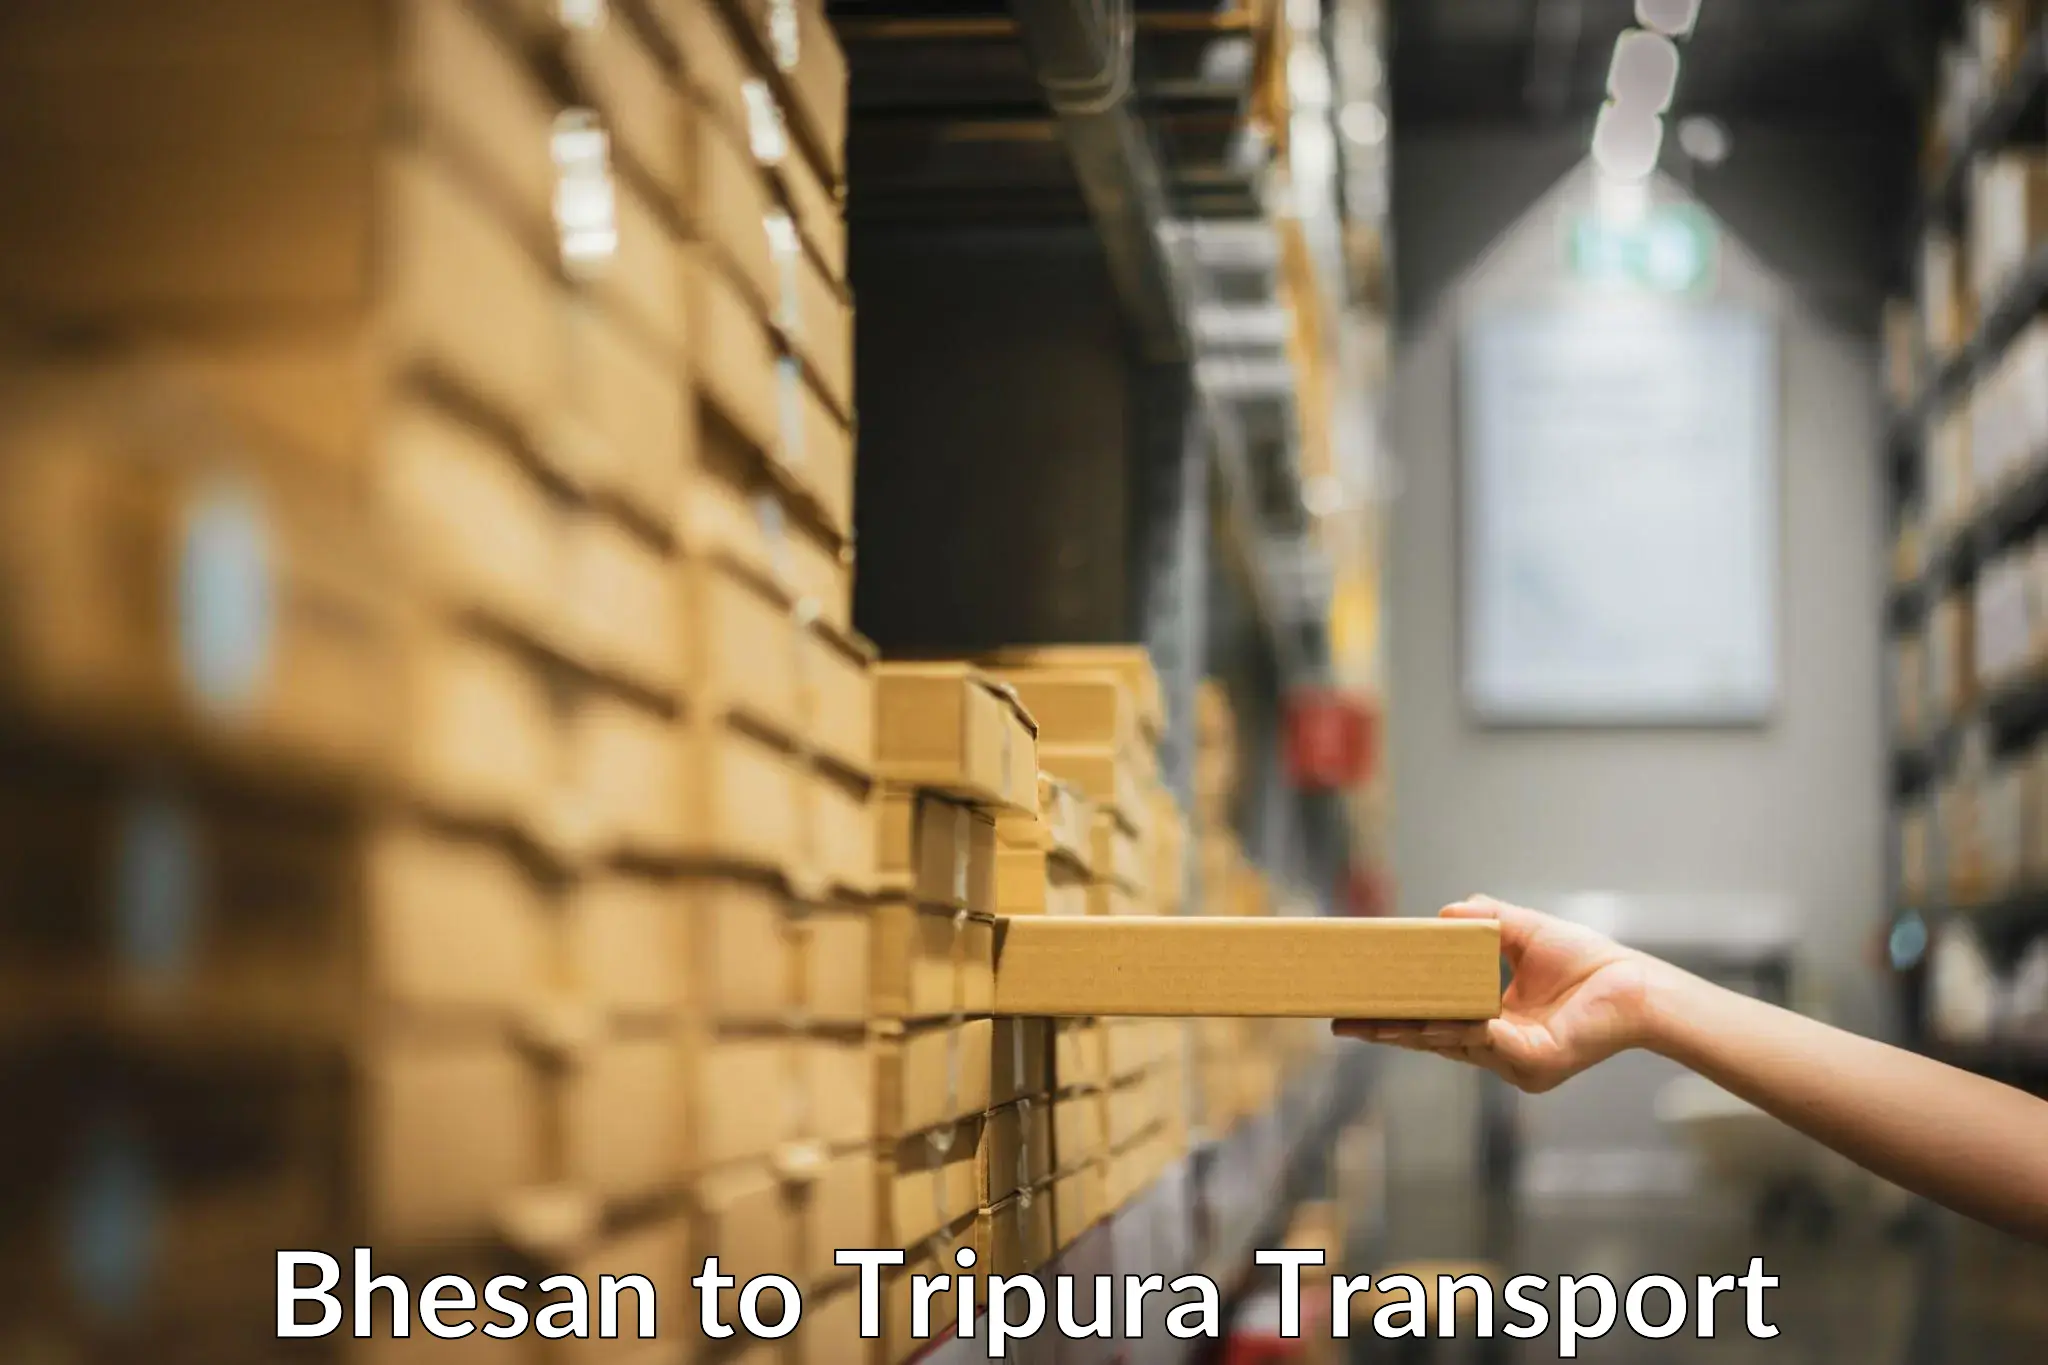 Delivery service Bhesan to Udaipur Tripura